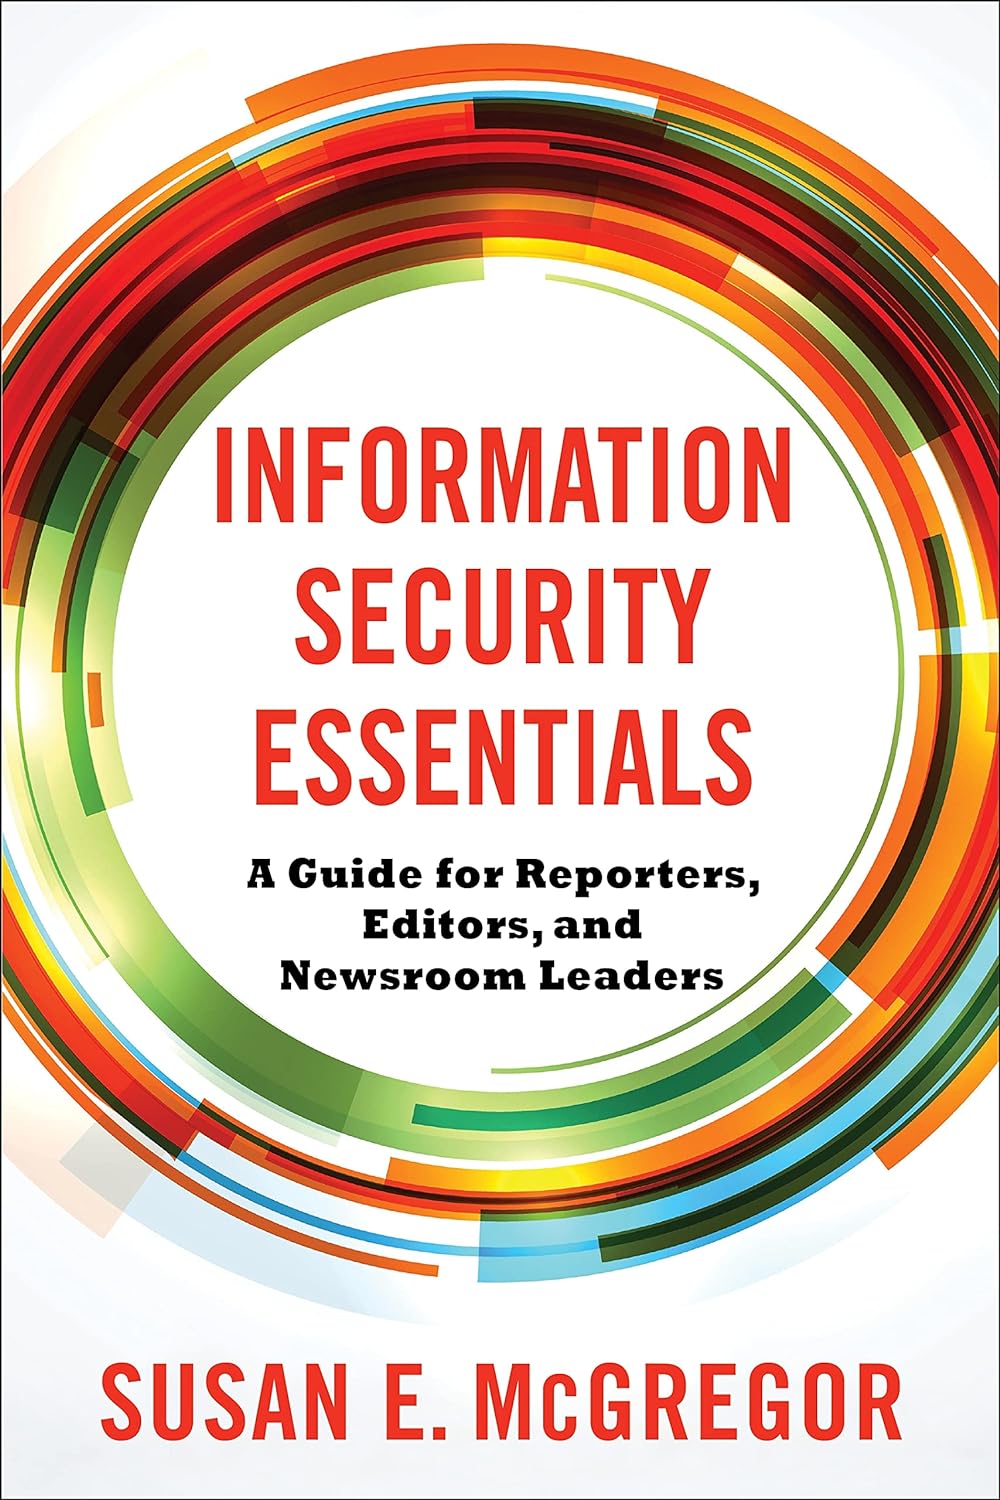 (EBook PDF)Information Security Essentials: A Guide for Reporters, Editors, and Newsroom Leaders by Susan E. McGregor